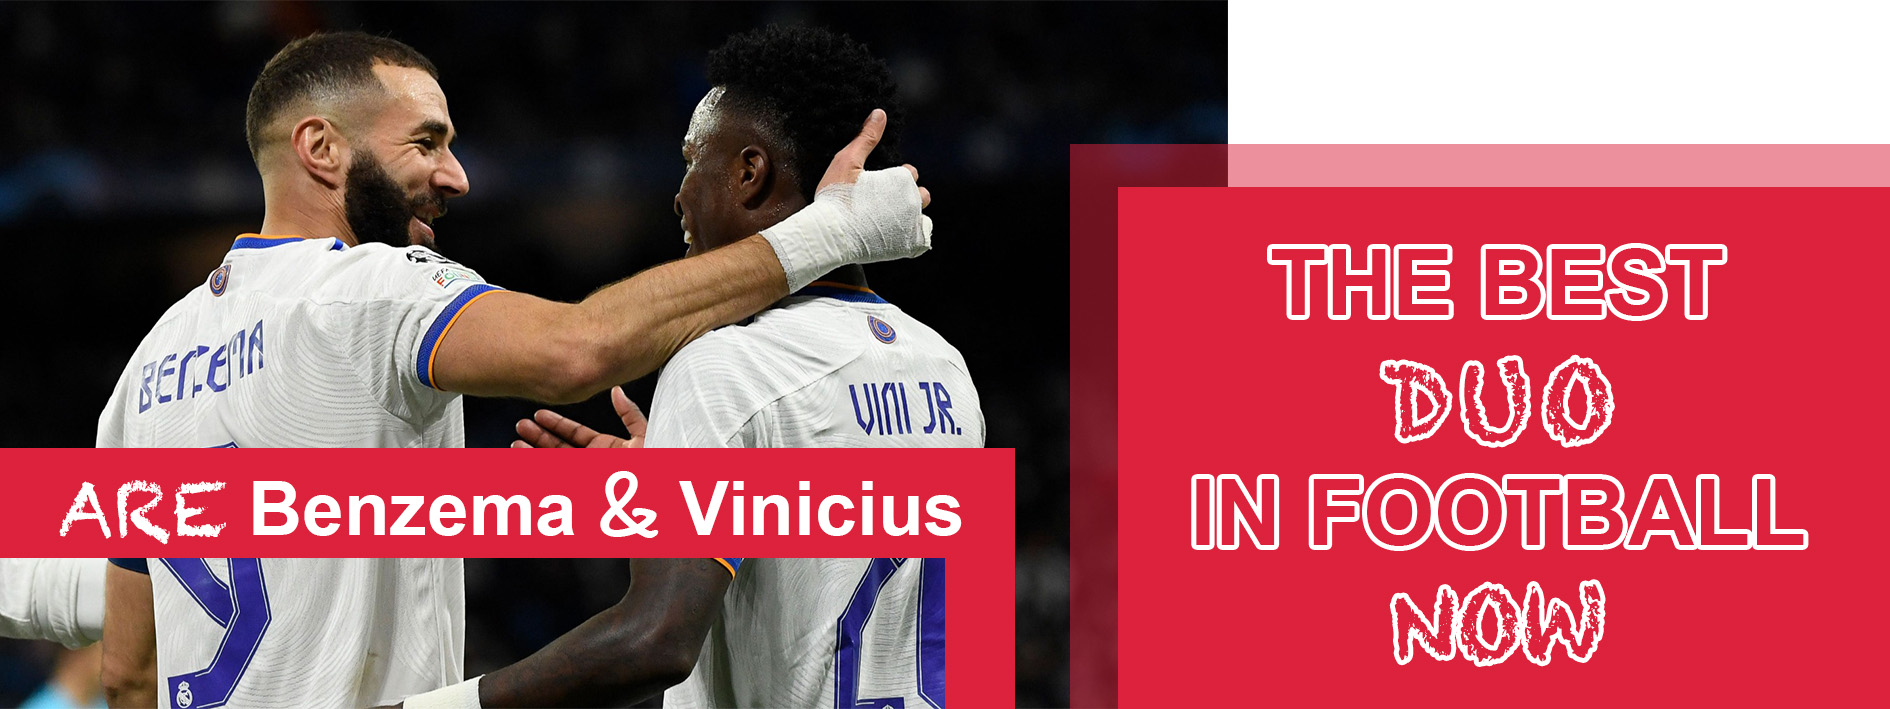 Are Benzema And Vinicius The Best Duo In Football Now?